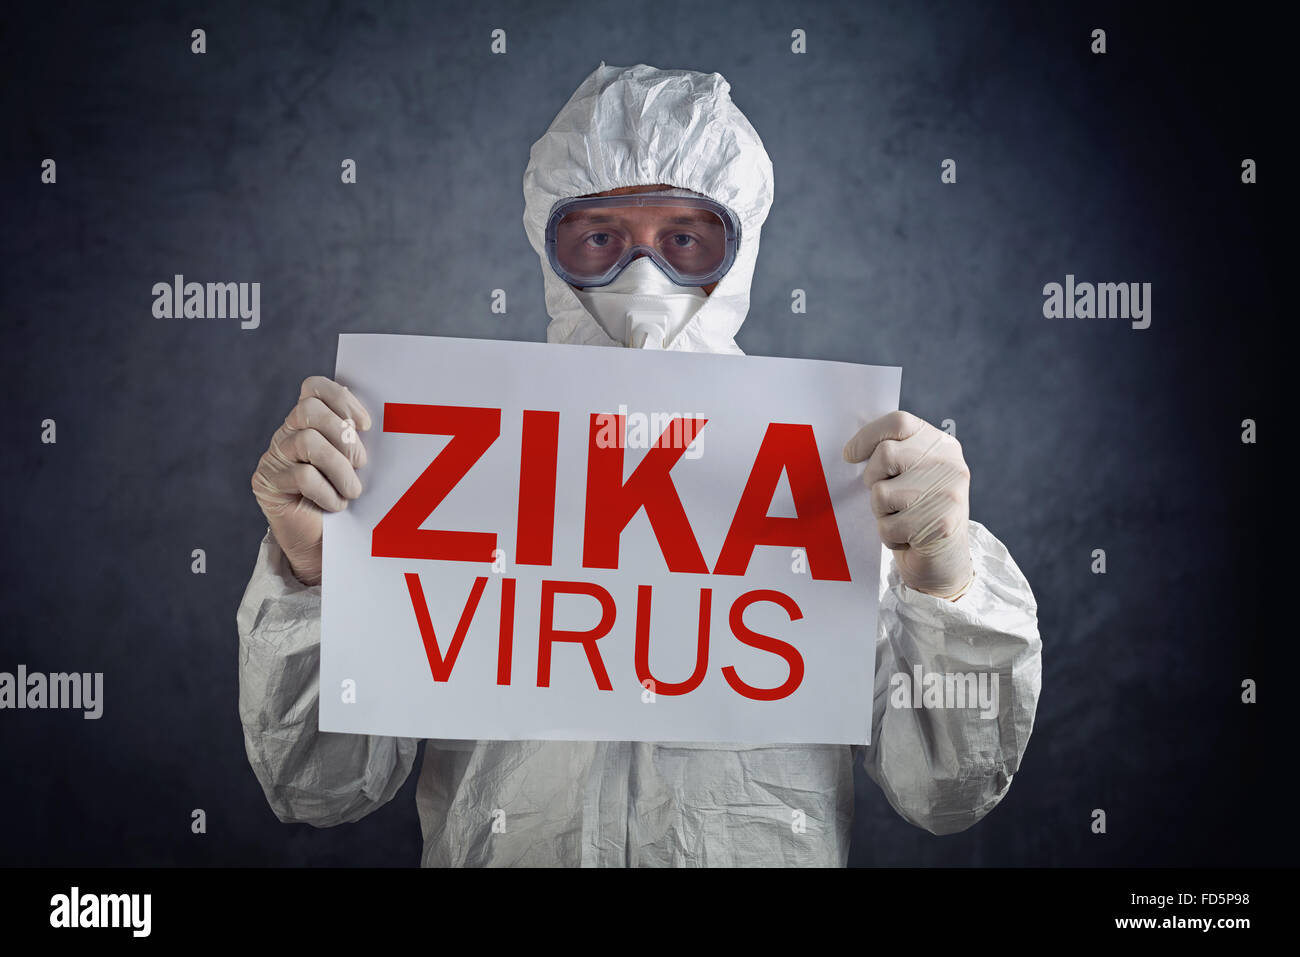 Zika virus concept, medical worker in protective clothes showing alertness poster Stock Photo